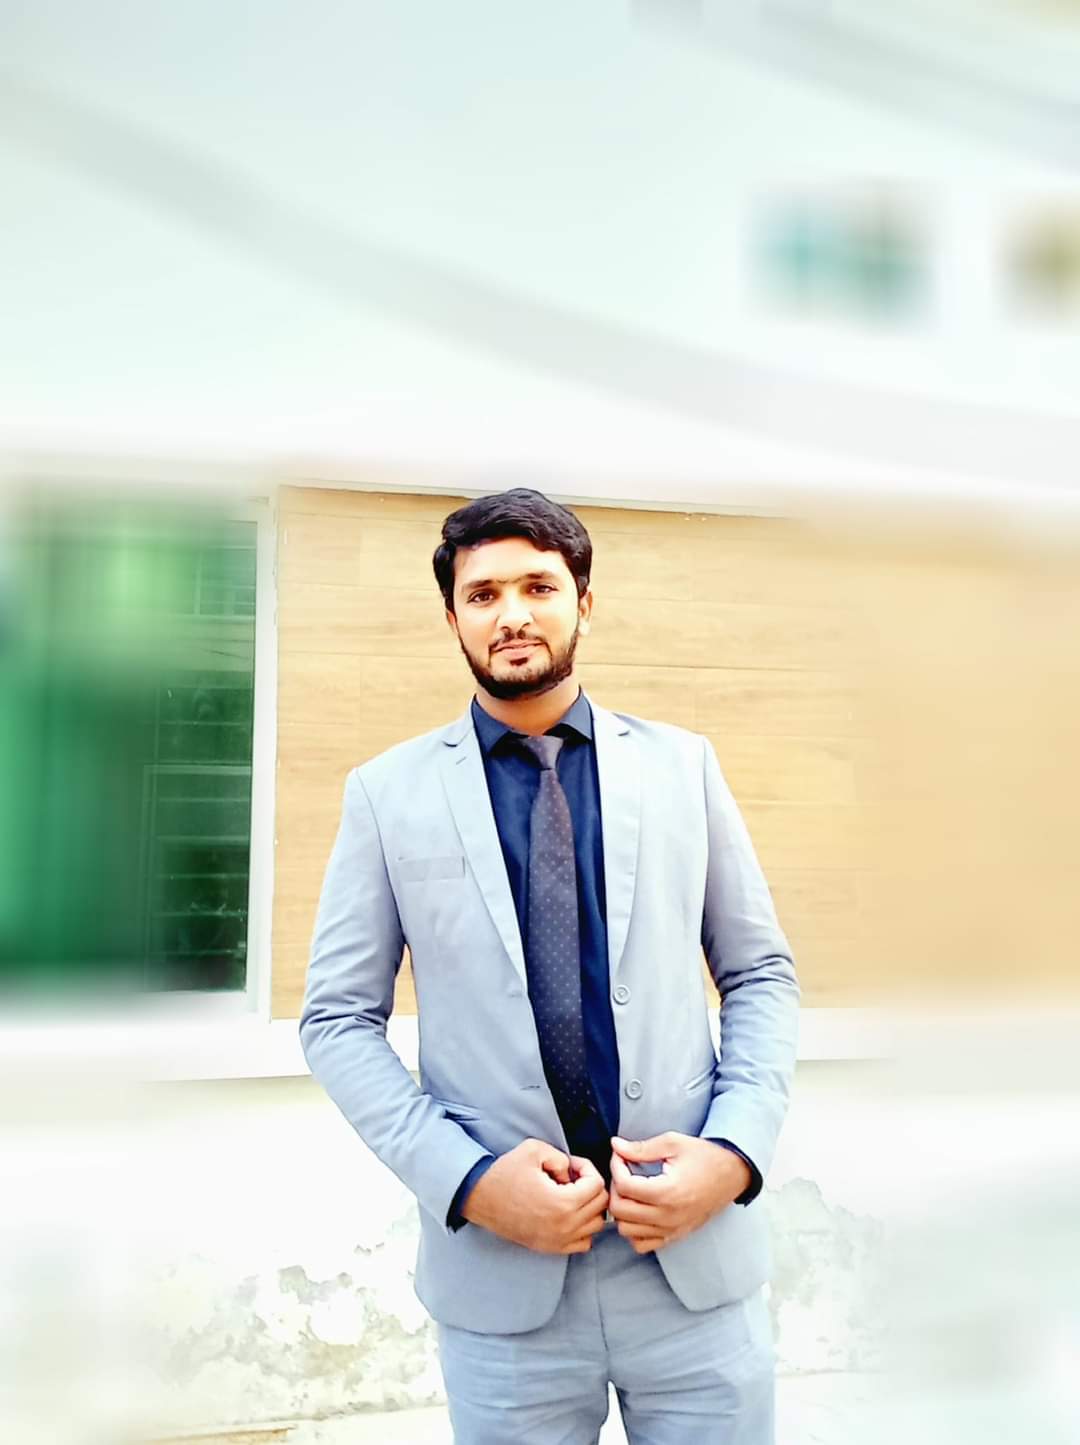 muhammad ahmed admitted in xjtu csc guide scholar walls